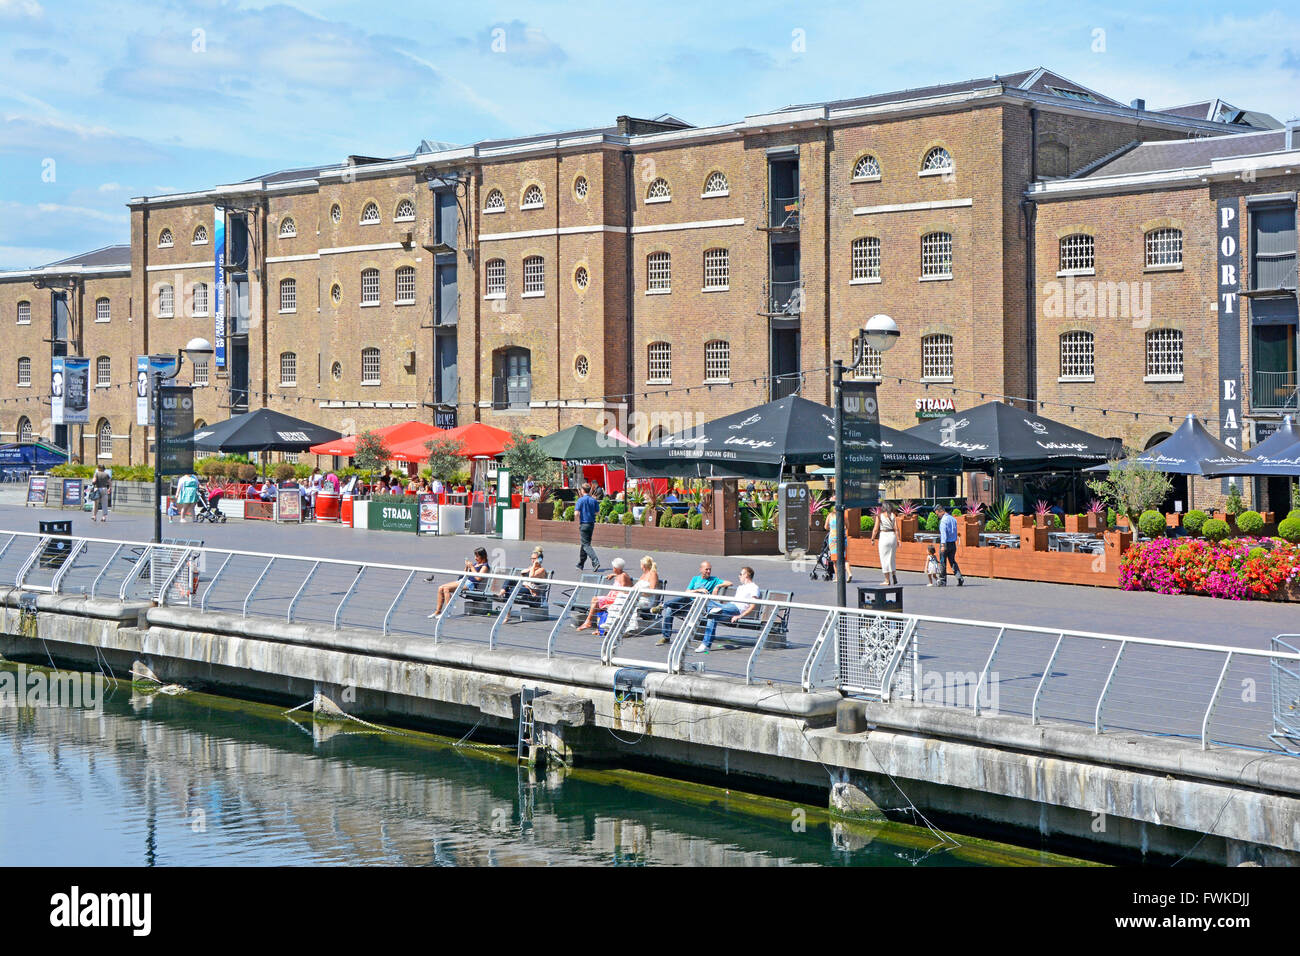 West India Docks old North Dock at Canary Wharf outdoor restaurant & converted warehouses buildings in London Docklands Isle of Dogs Tower Hamlets UK Stock Photo